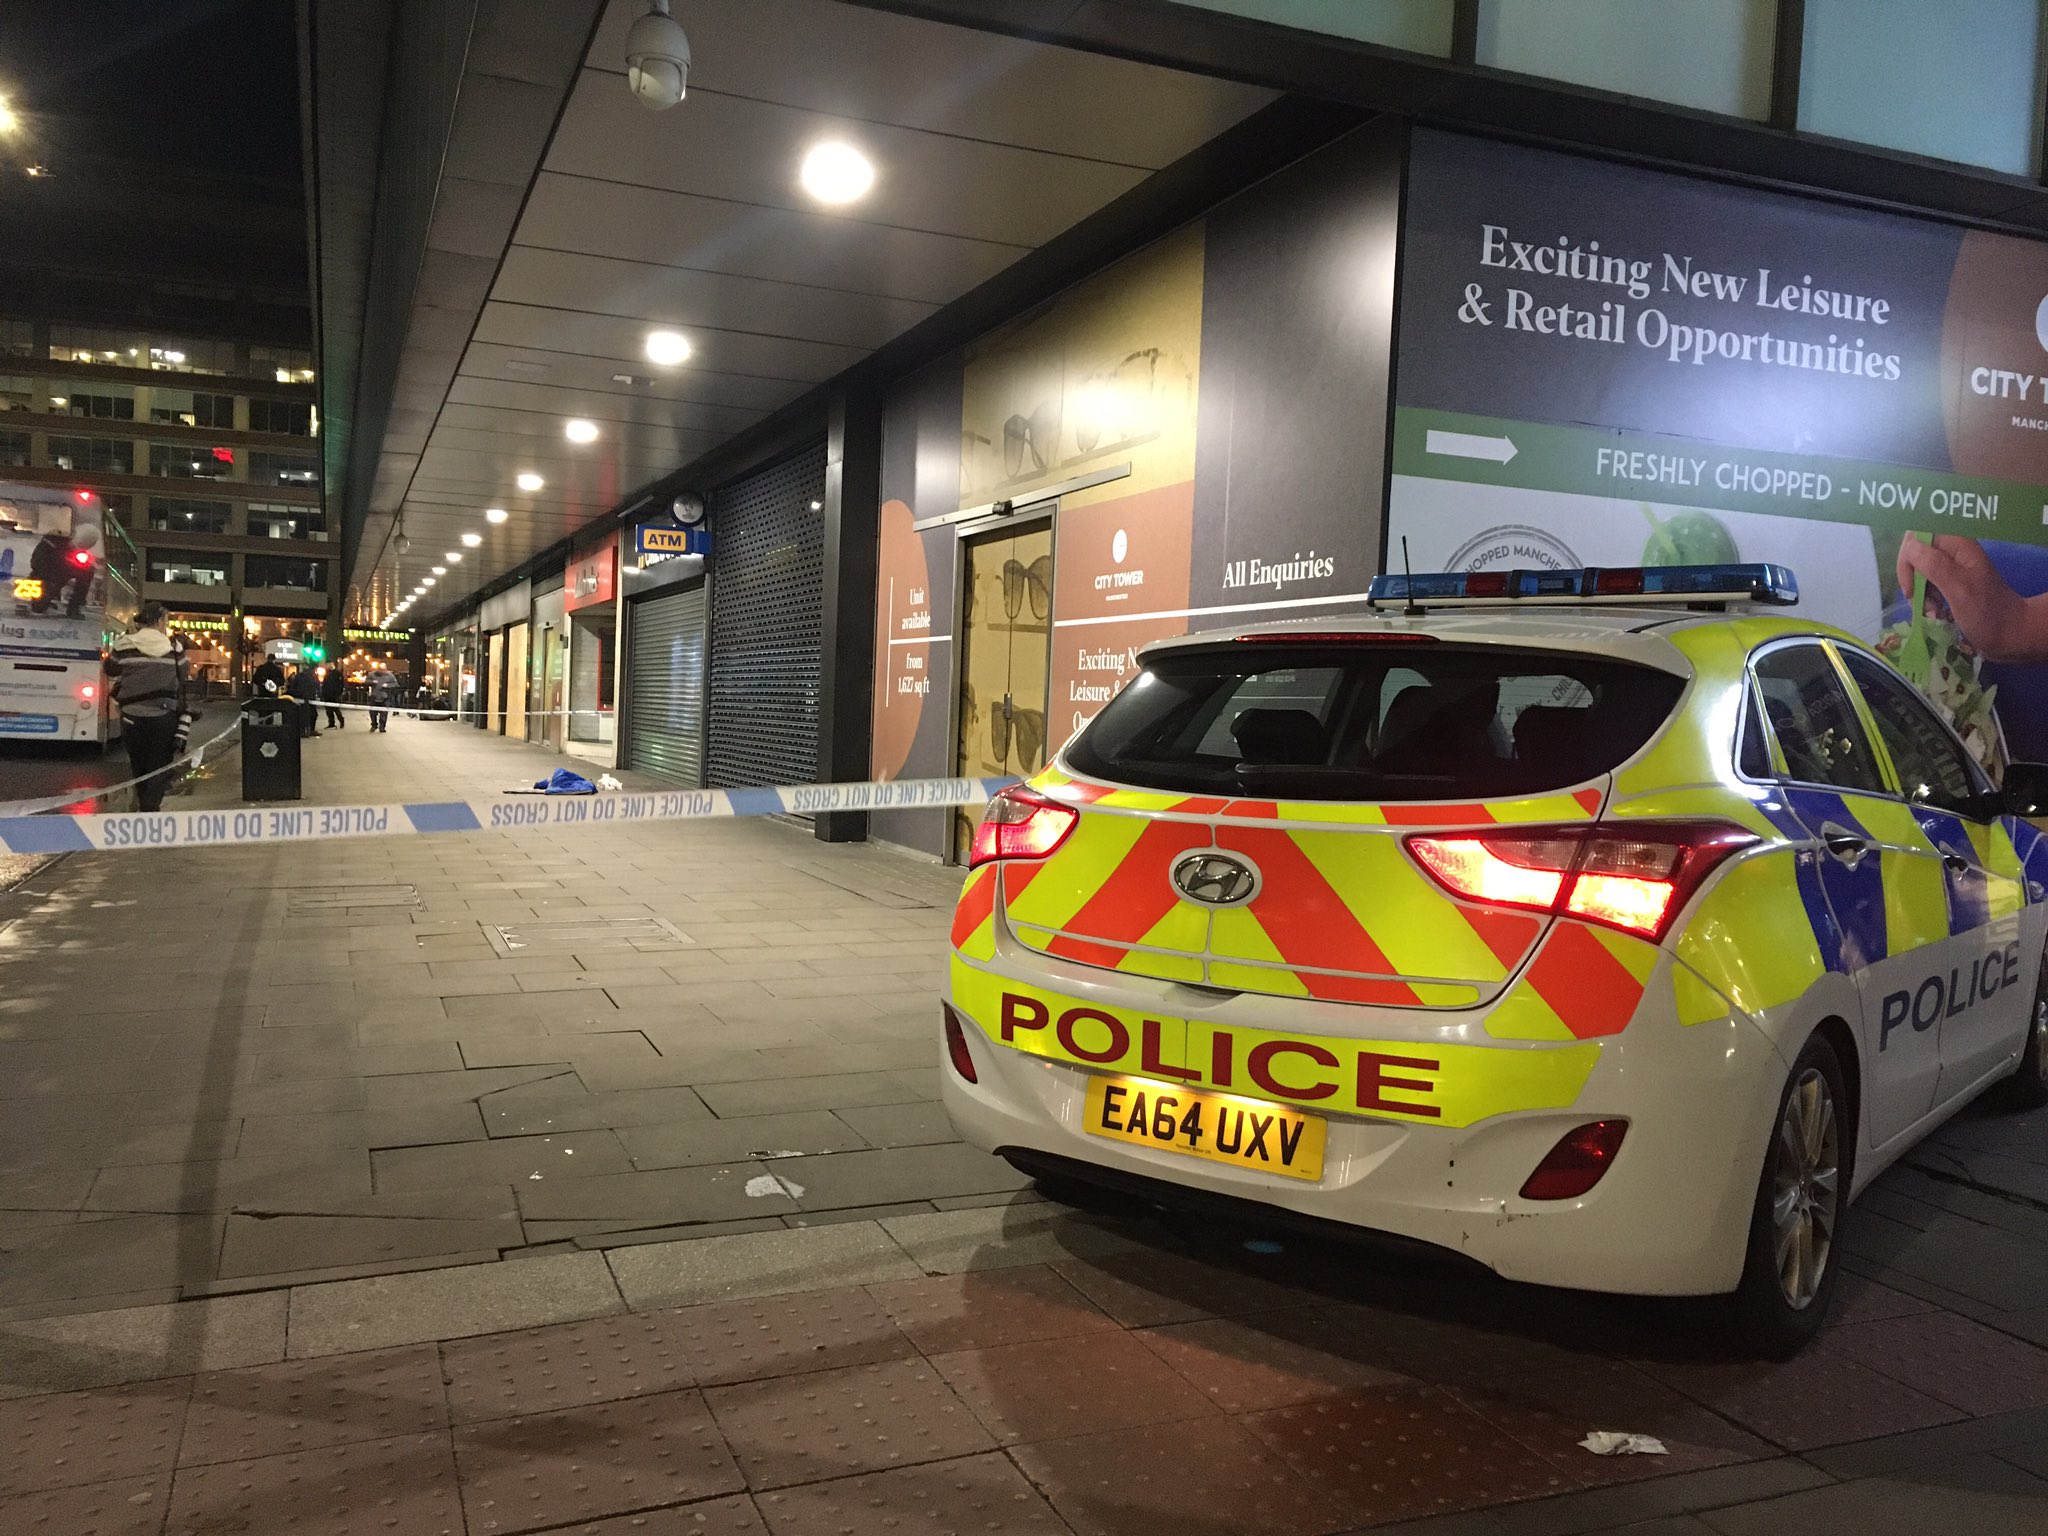 Responding officers located a 30-year-old man outside a Primark department store near Piccadilly Gardens and were forced to use a taser during the arrest.